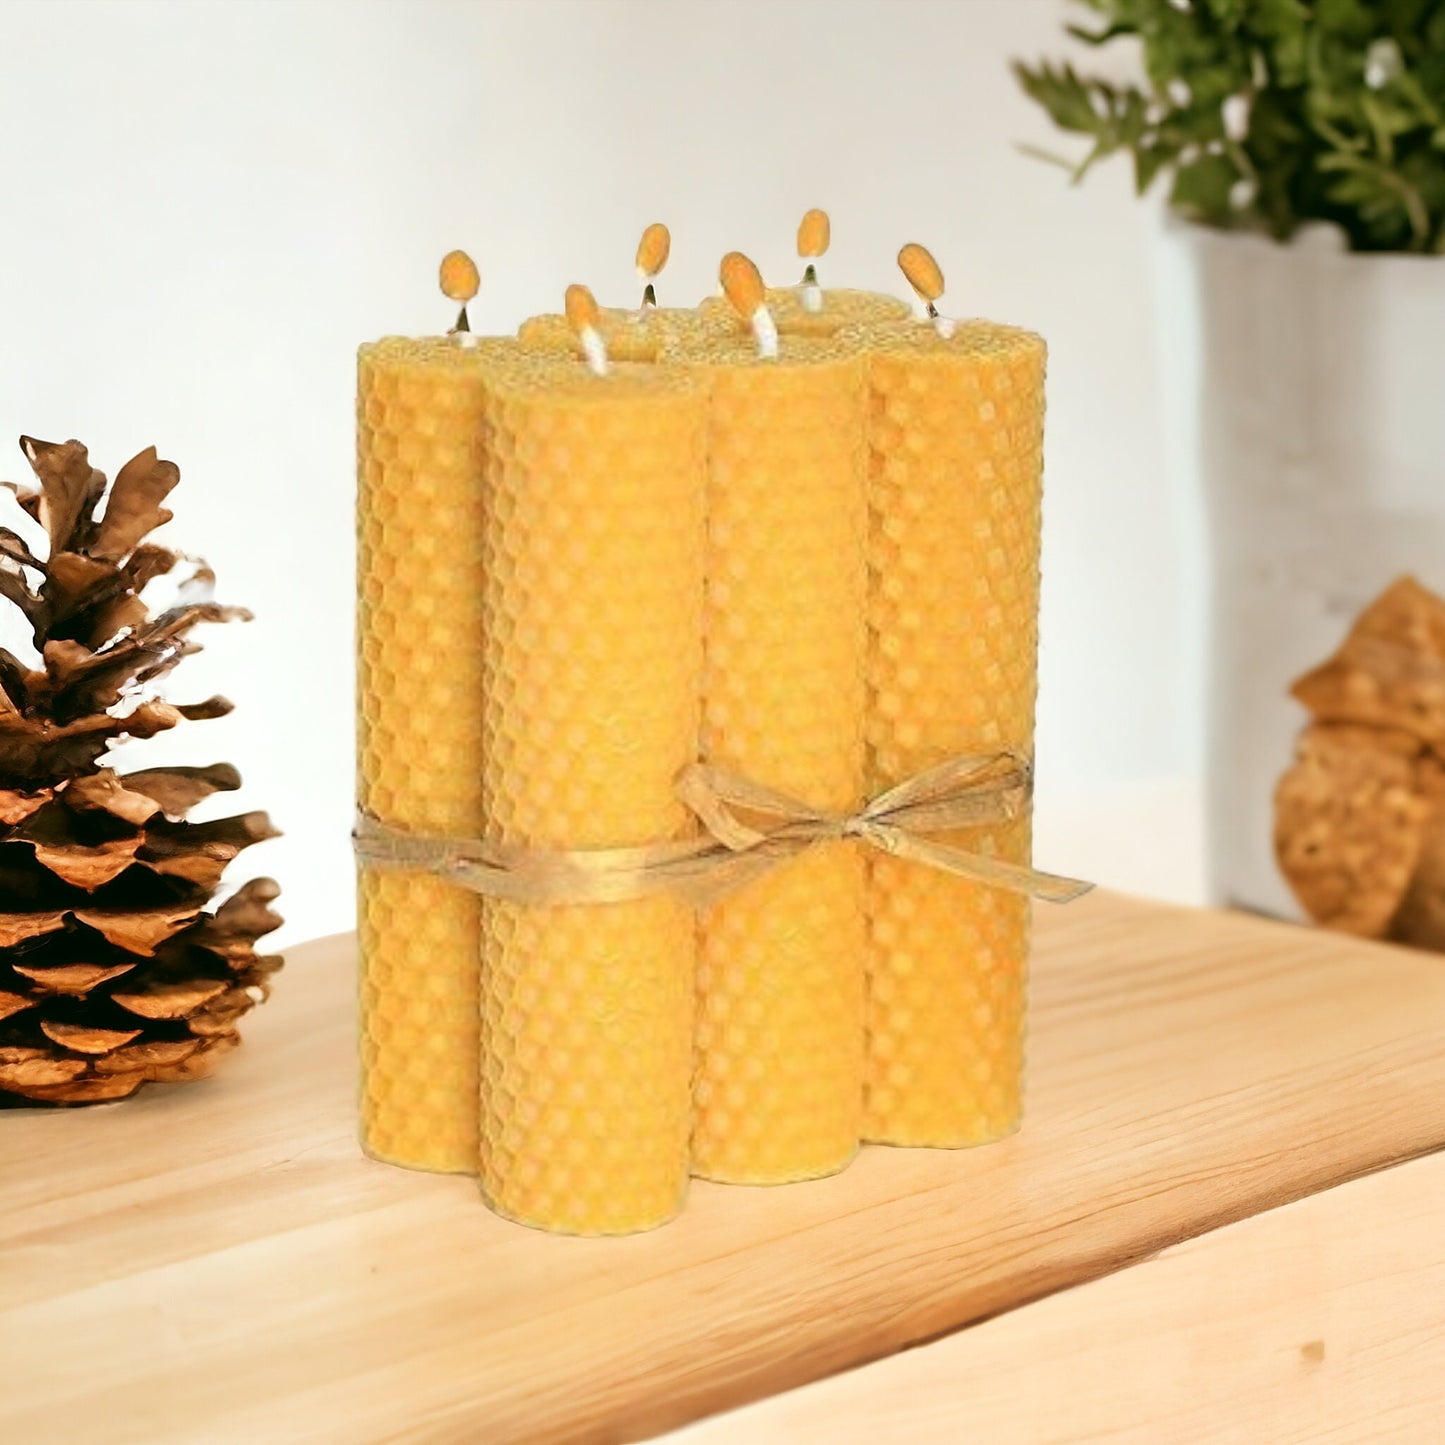 6" Luck Candles 10pcs, %100 beeswax candles, Hand-rolled honeycomb candles